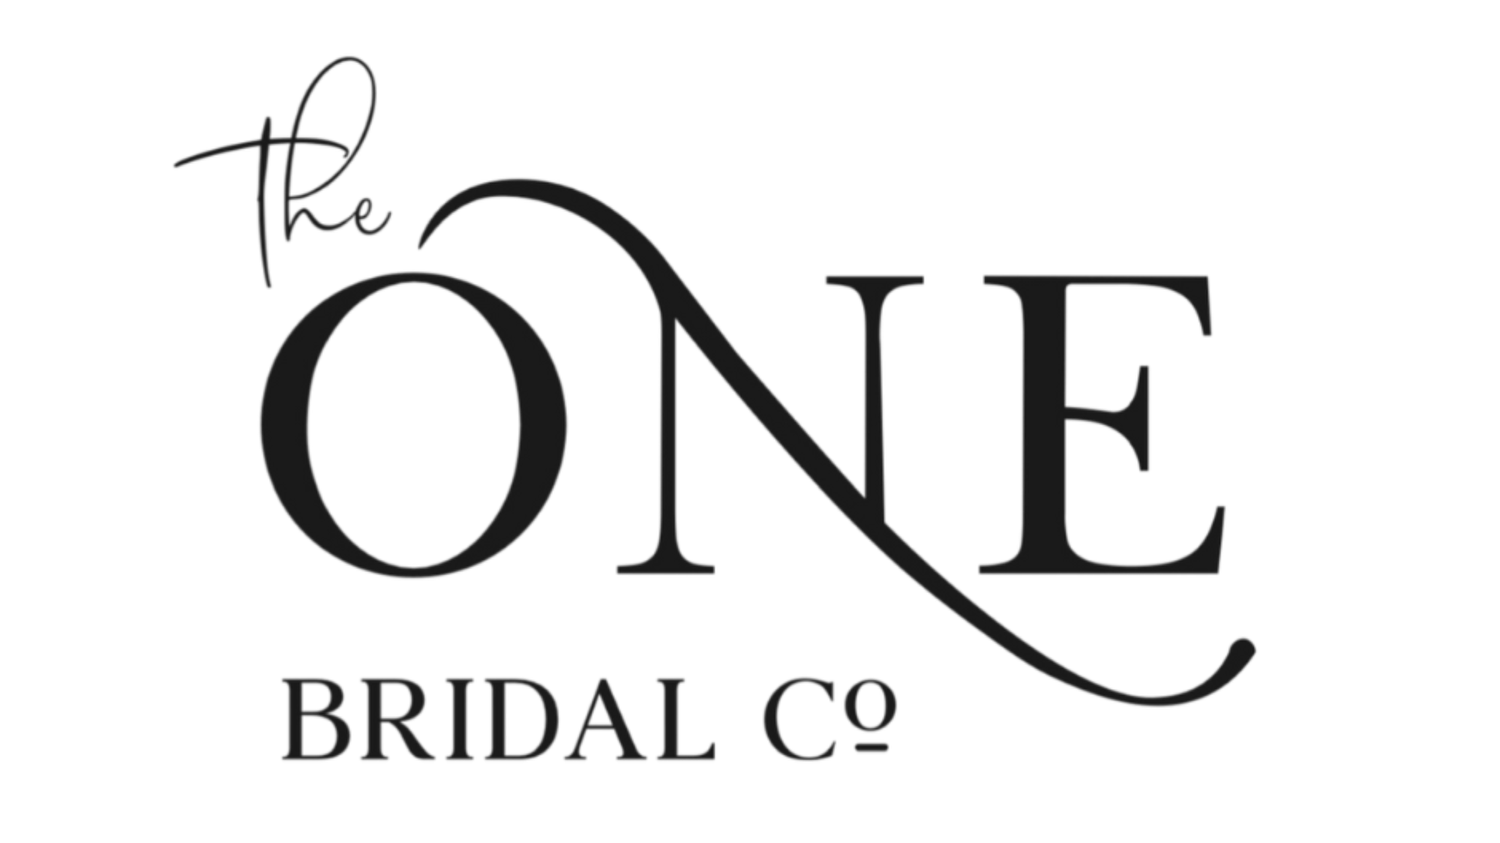 The One Bridal Co.